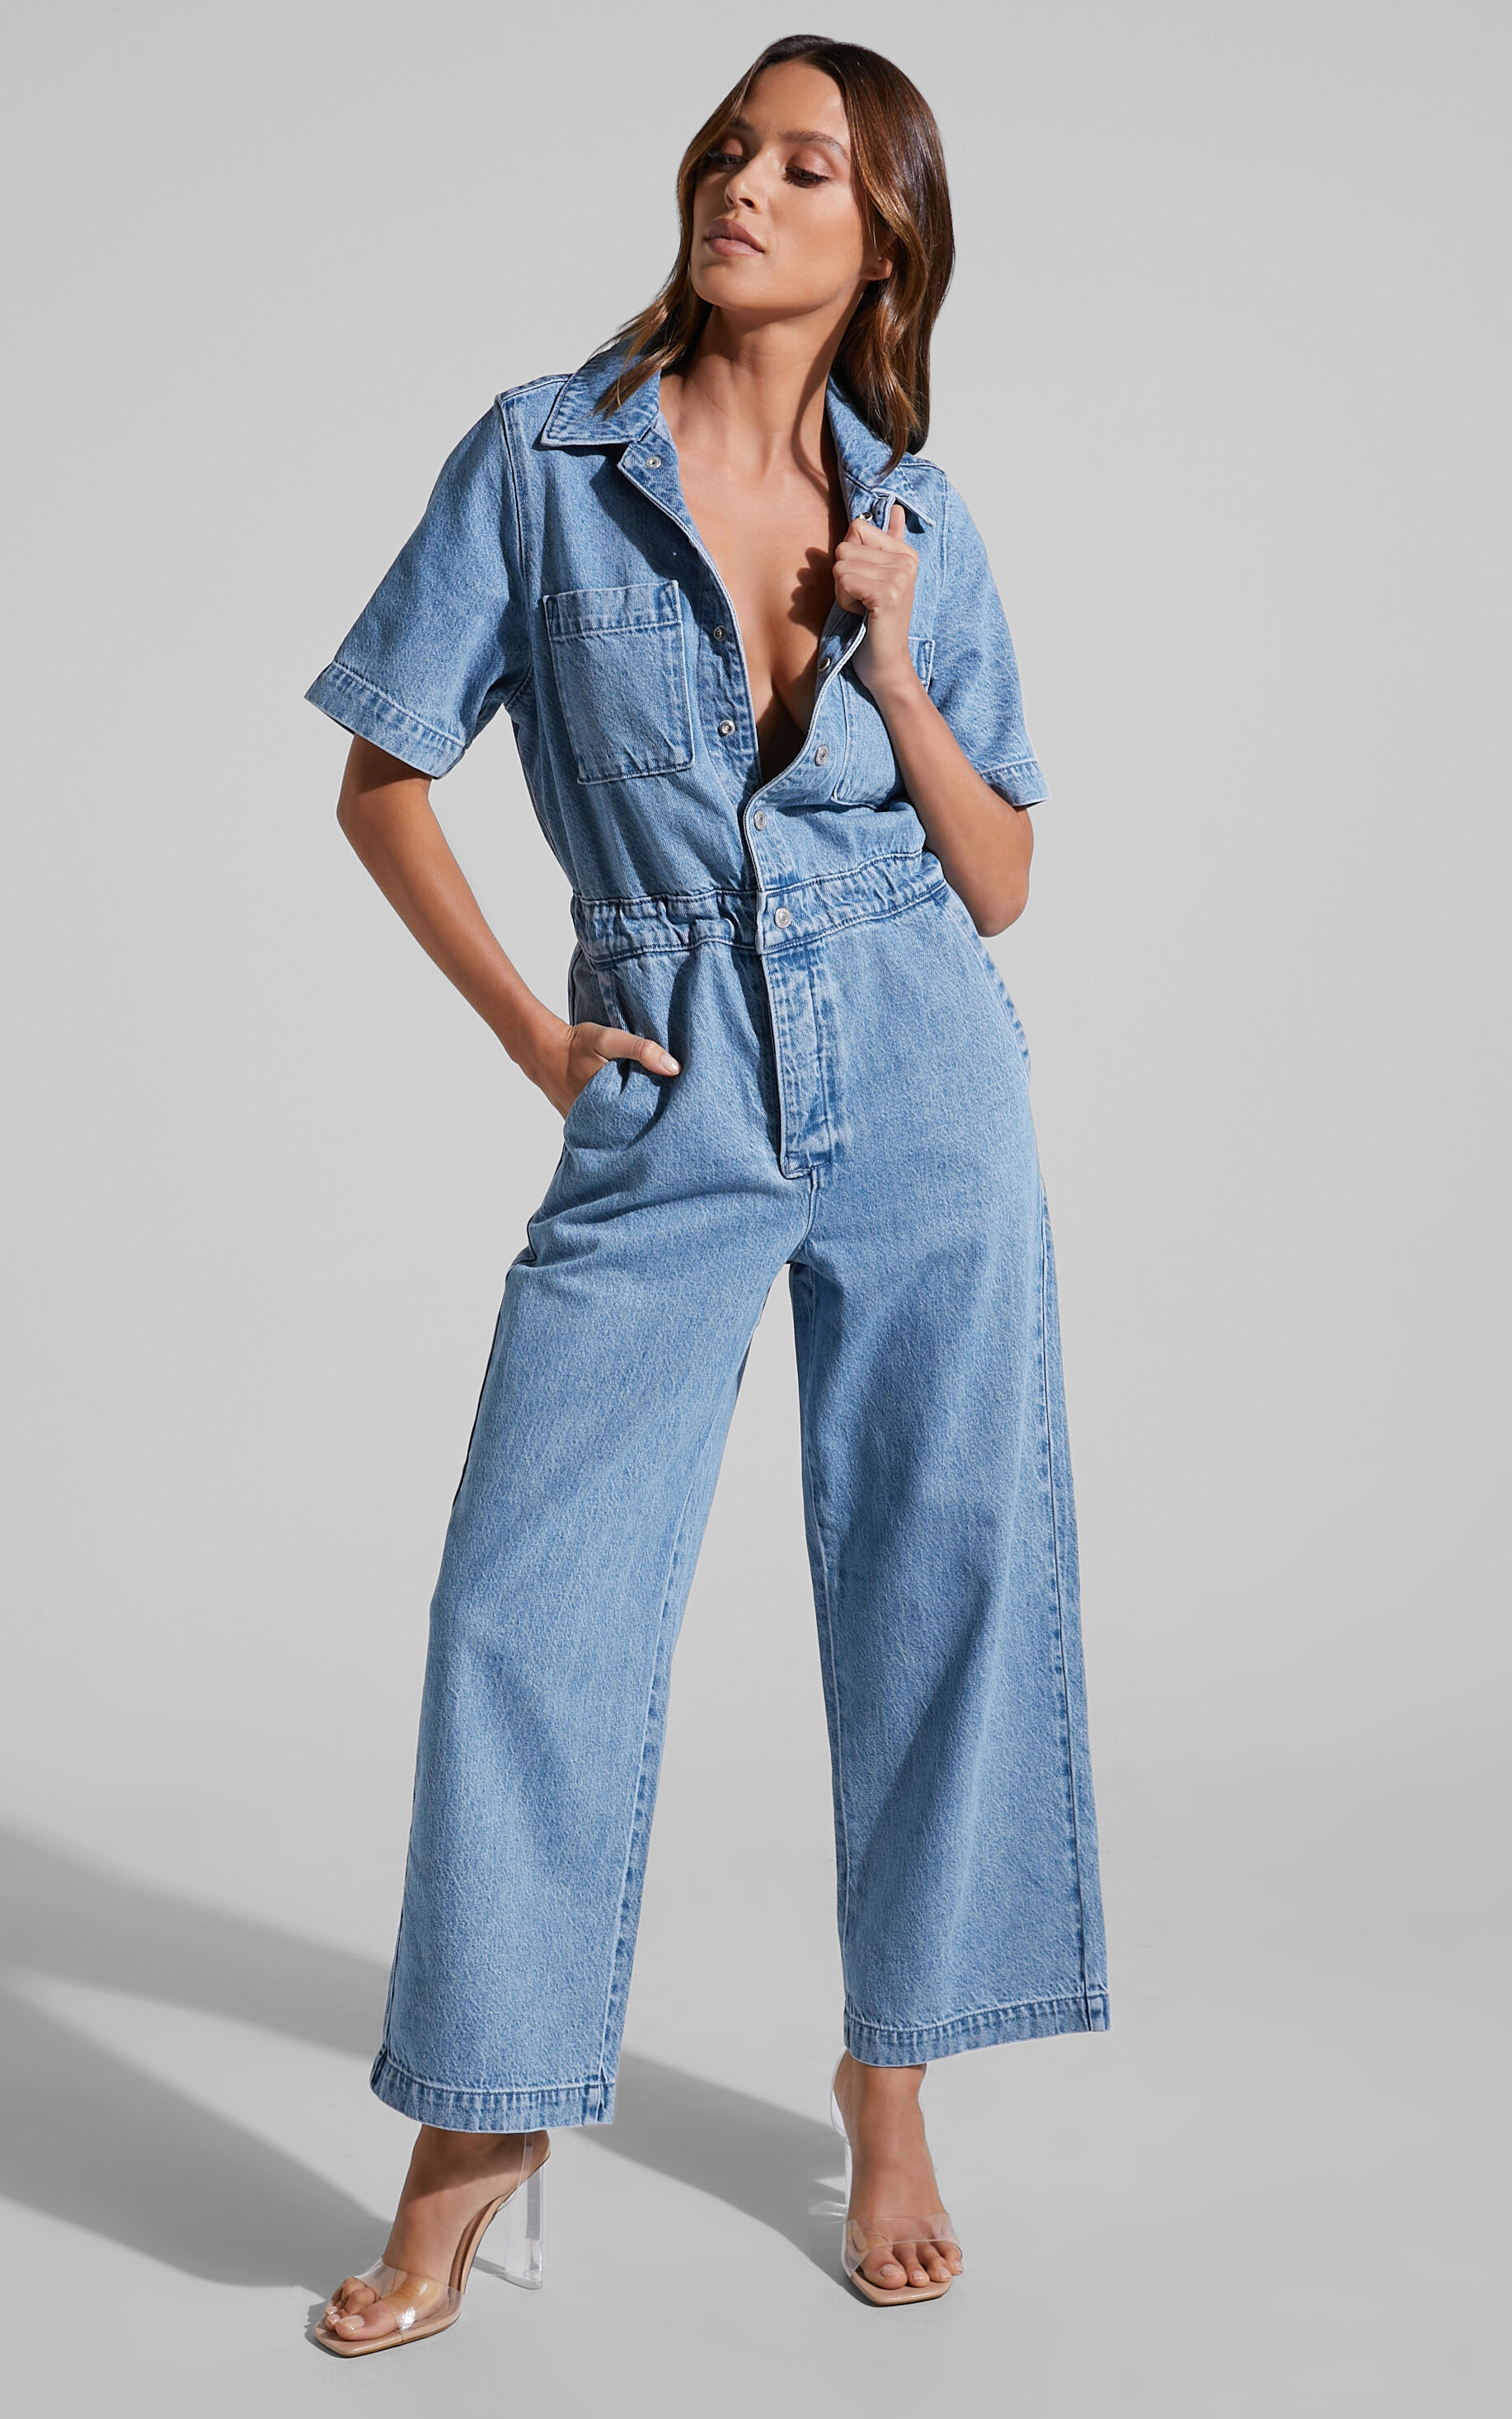 Levi's - SS BOILERSUIT in More Money More Problems - XS, BLU1, super-hi-res image number null